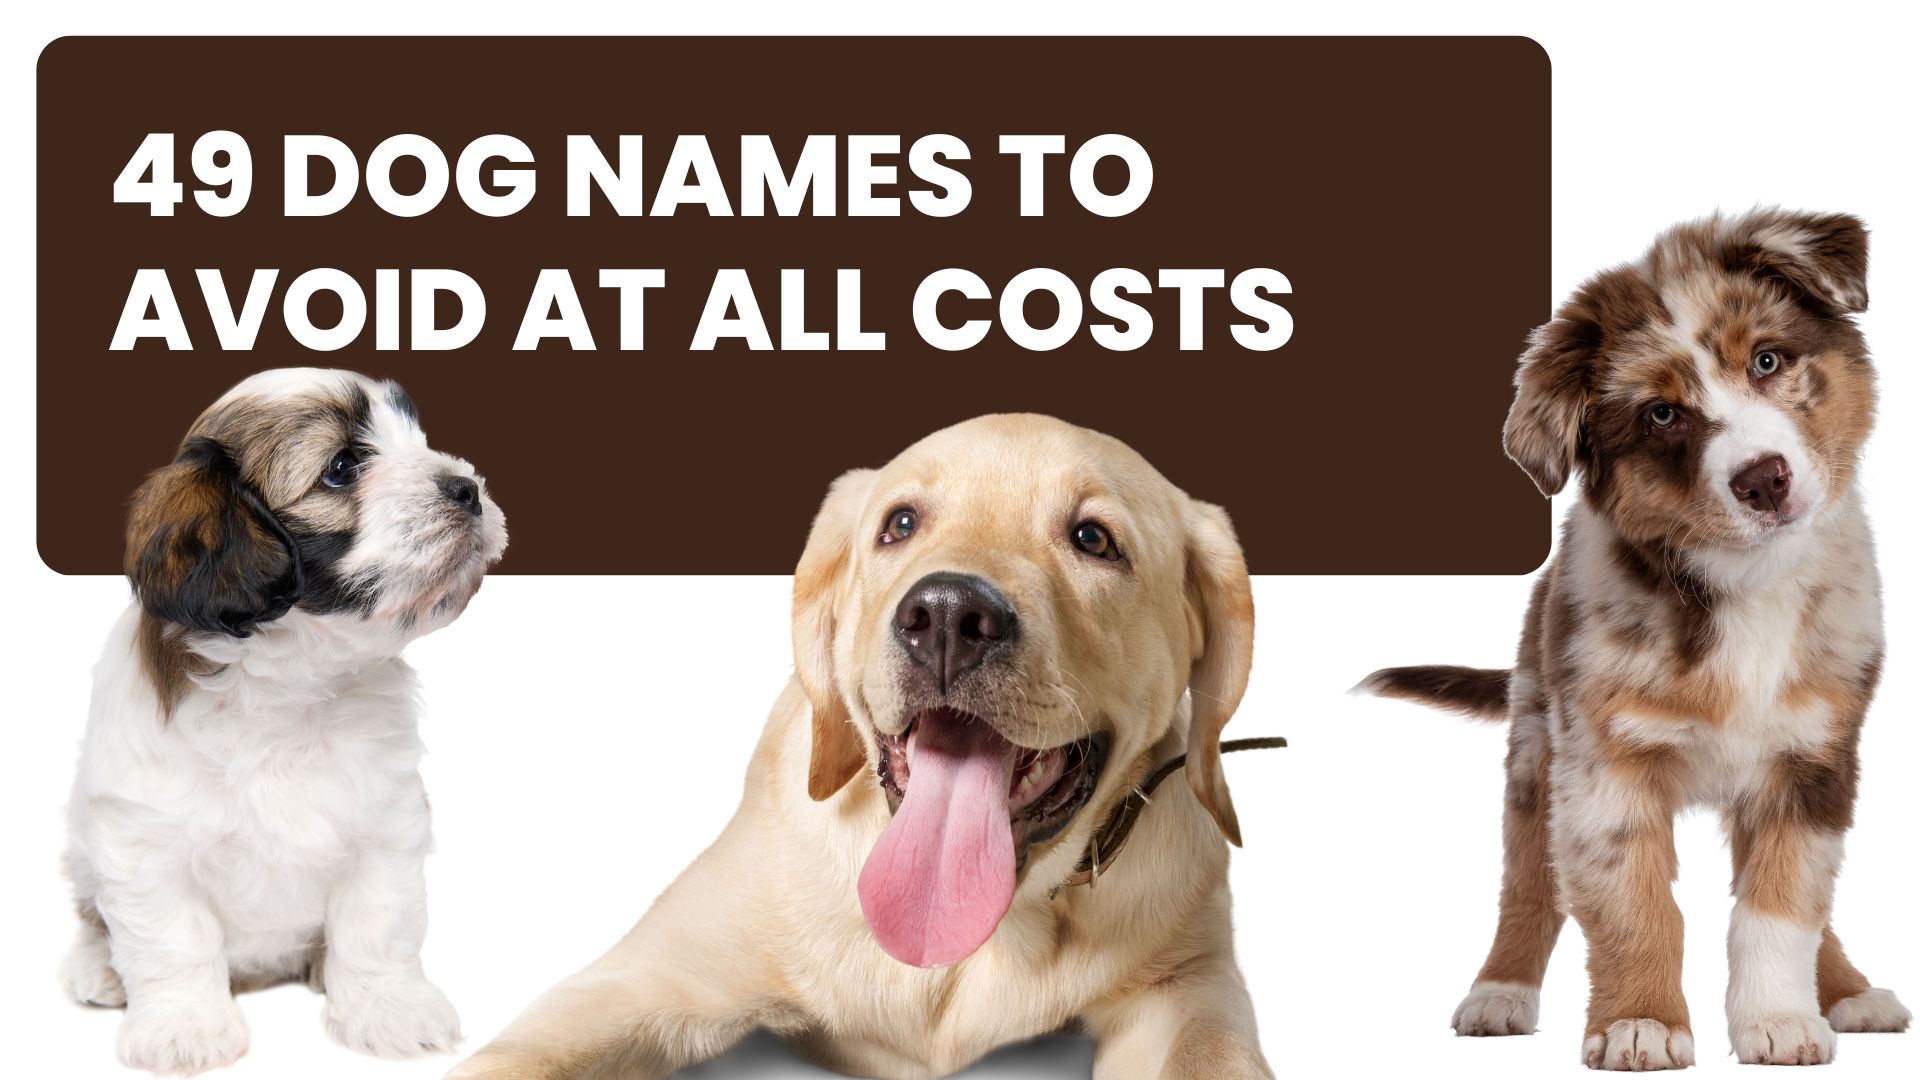 49 Dog Names To Avoid At All Costs (Check Yours)